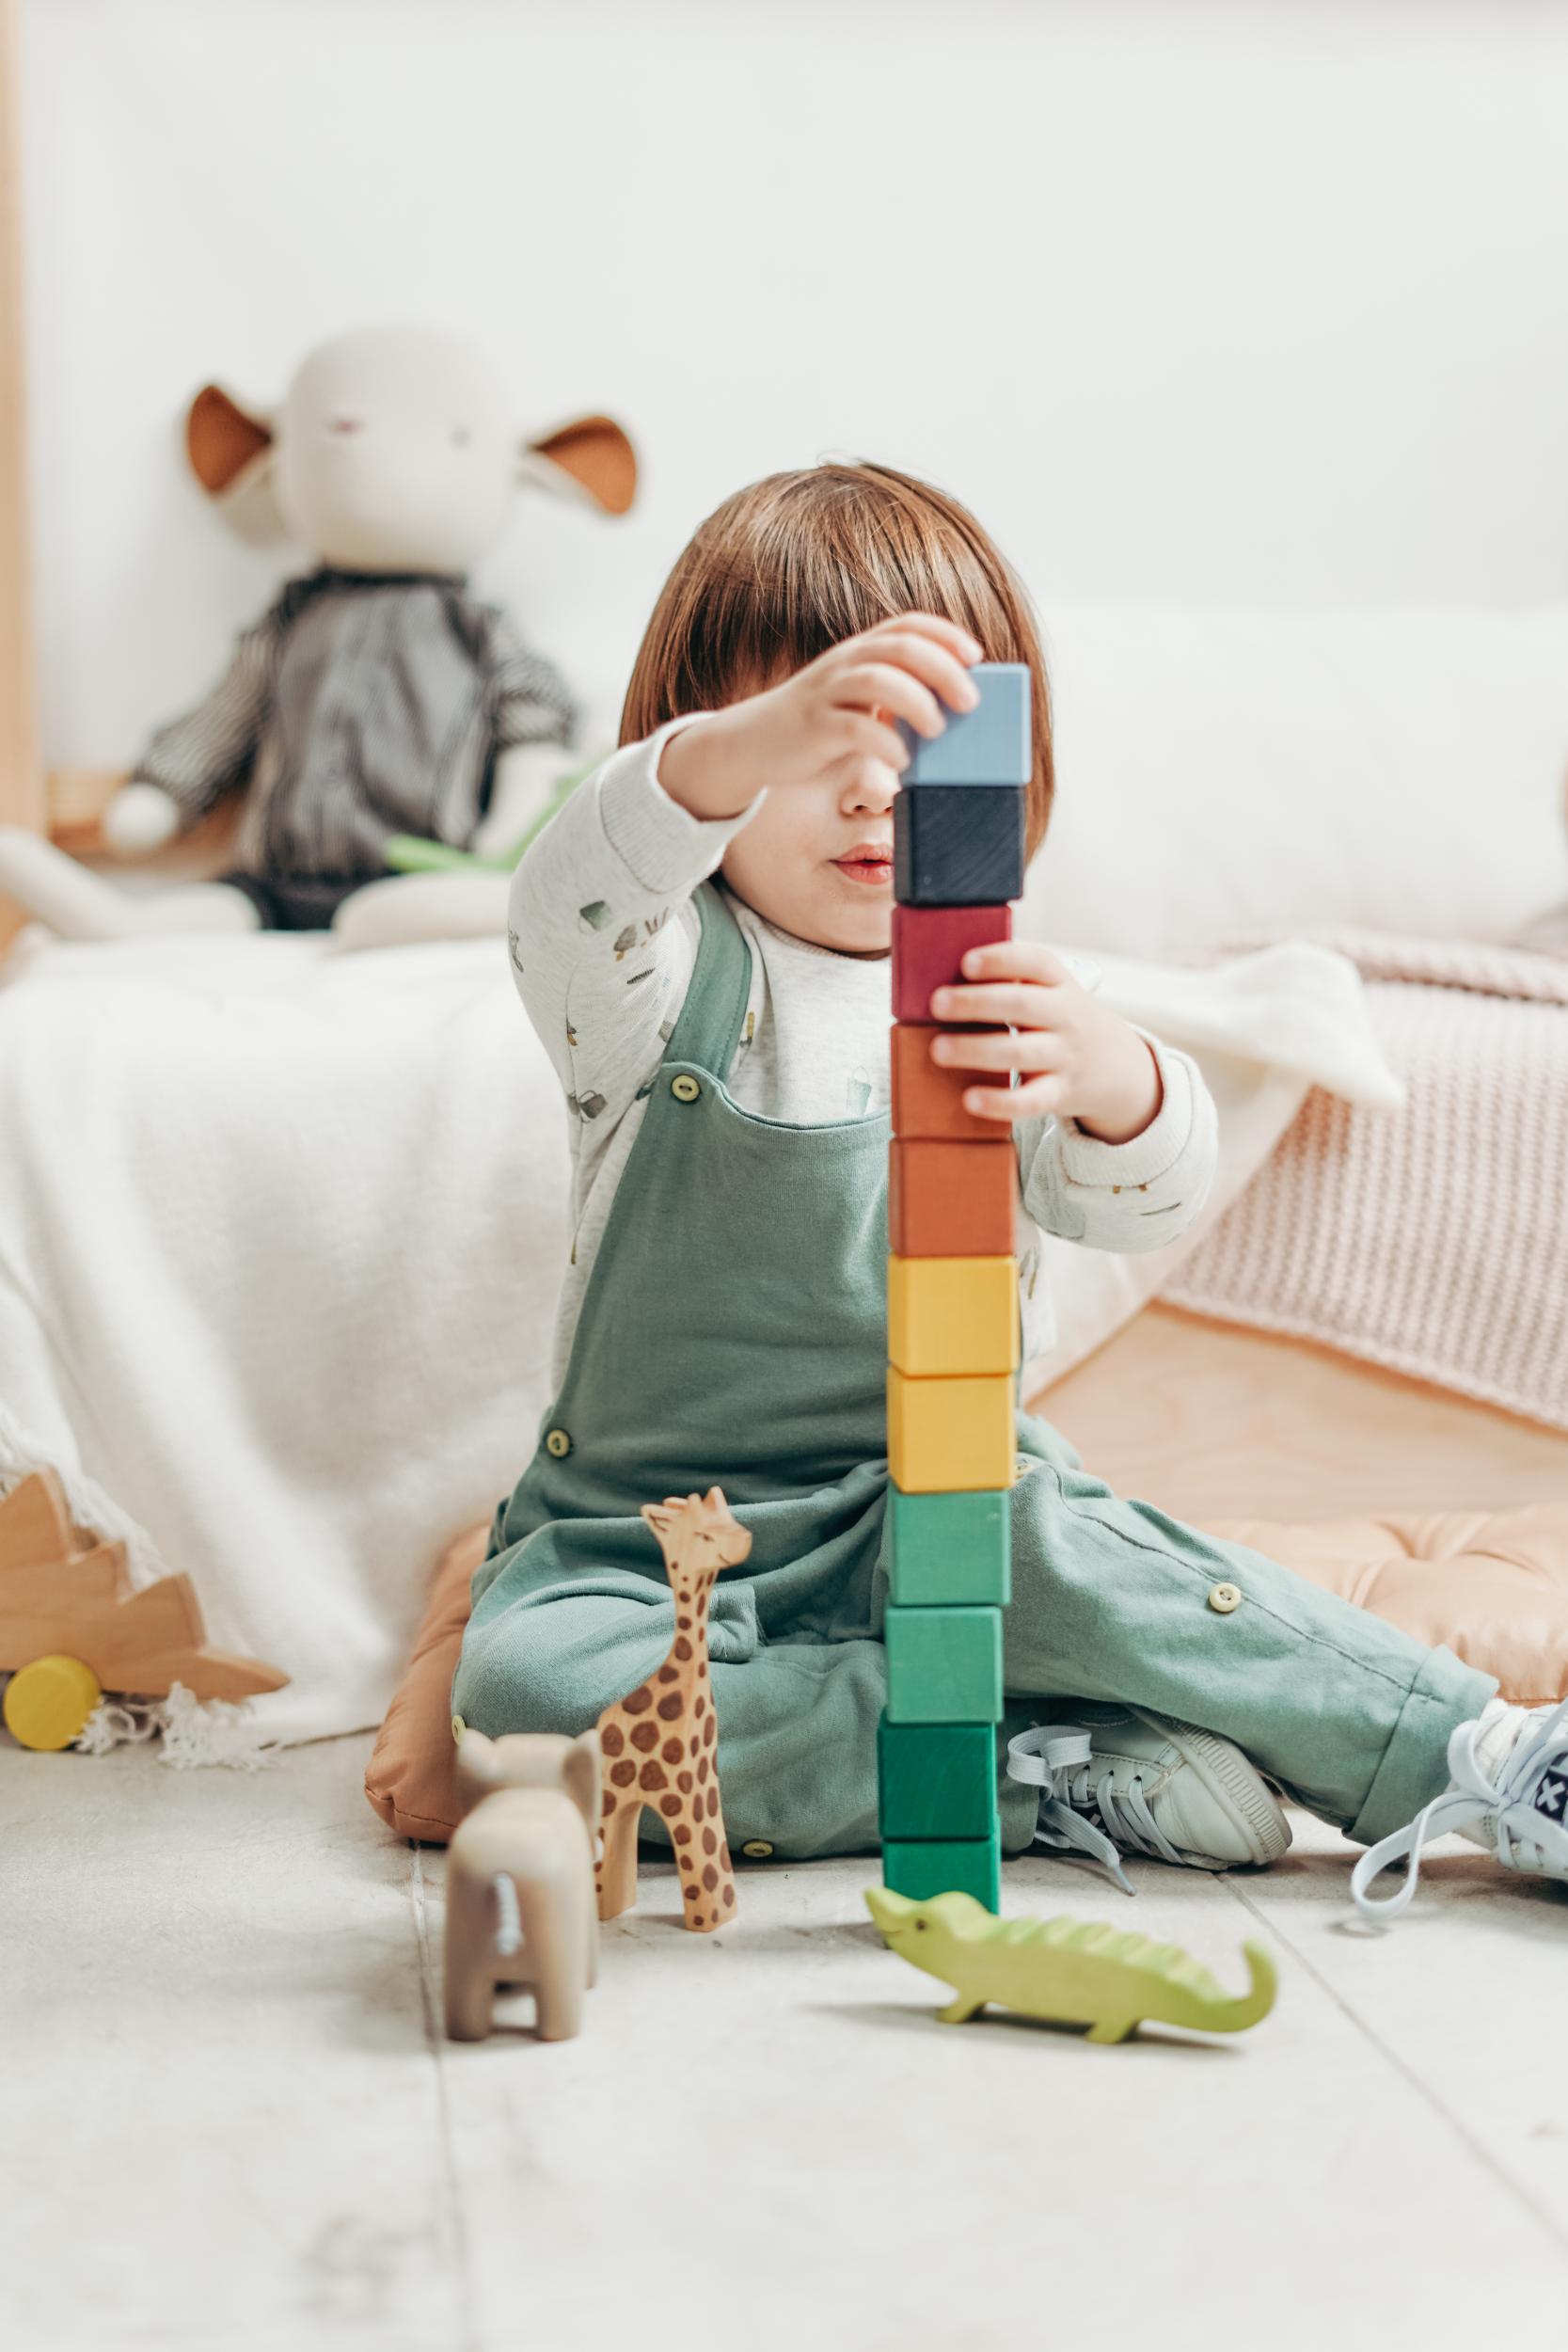 5 Strategies to Help Your Child Settle Into Daycare